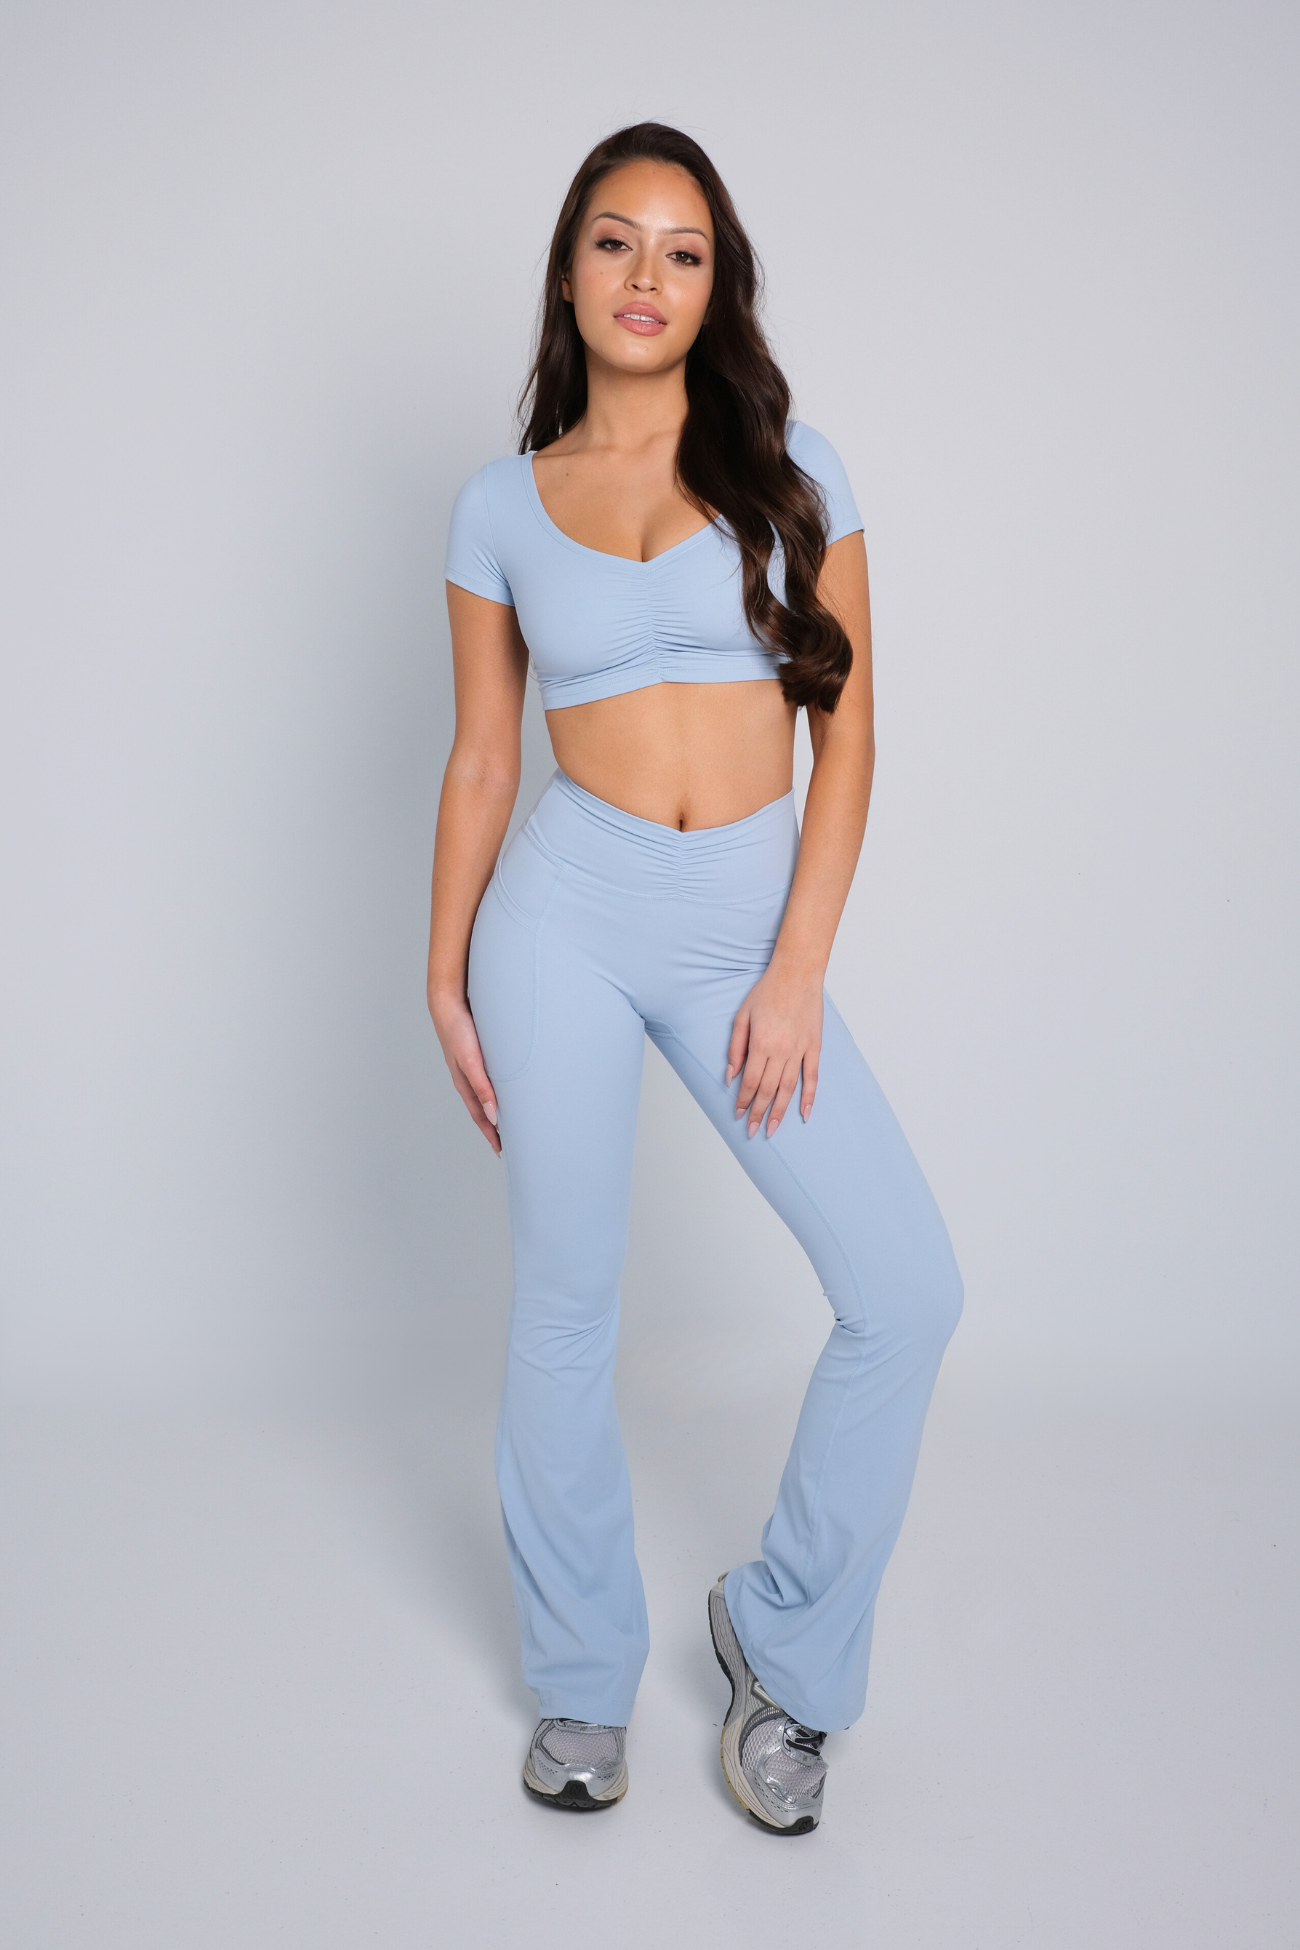 Ruched Flare Pocket (Tall) Leggings - Baby Blue – TwoTags